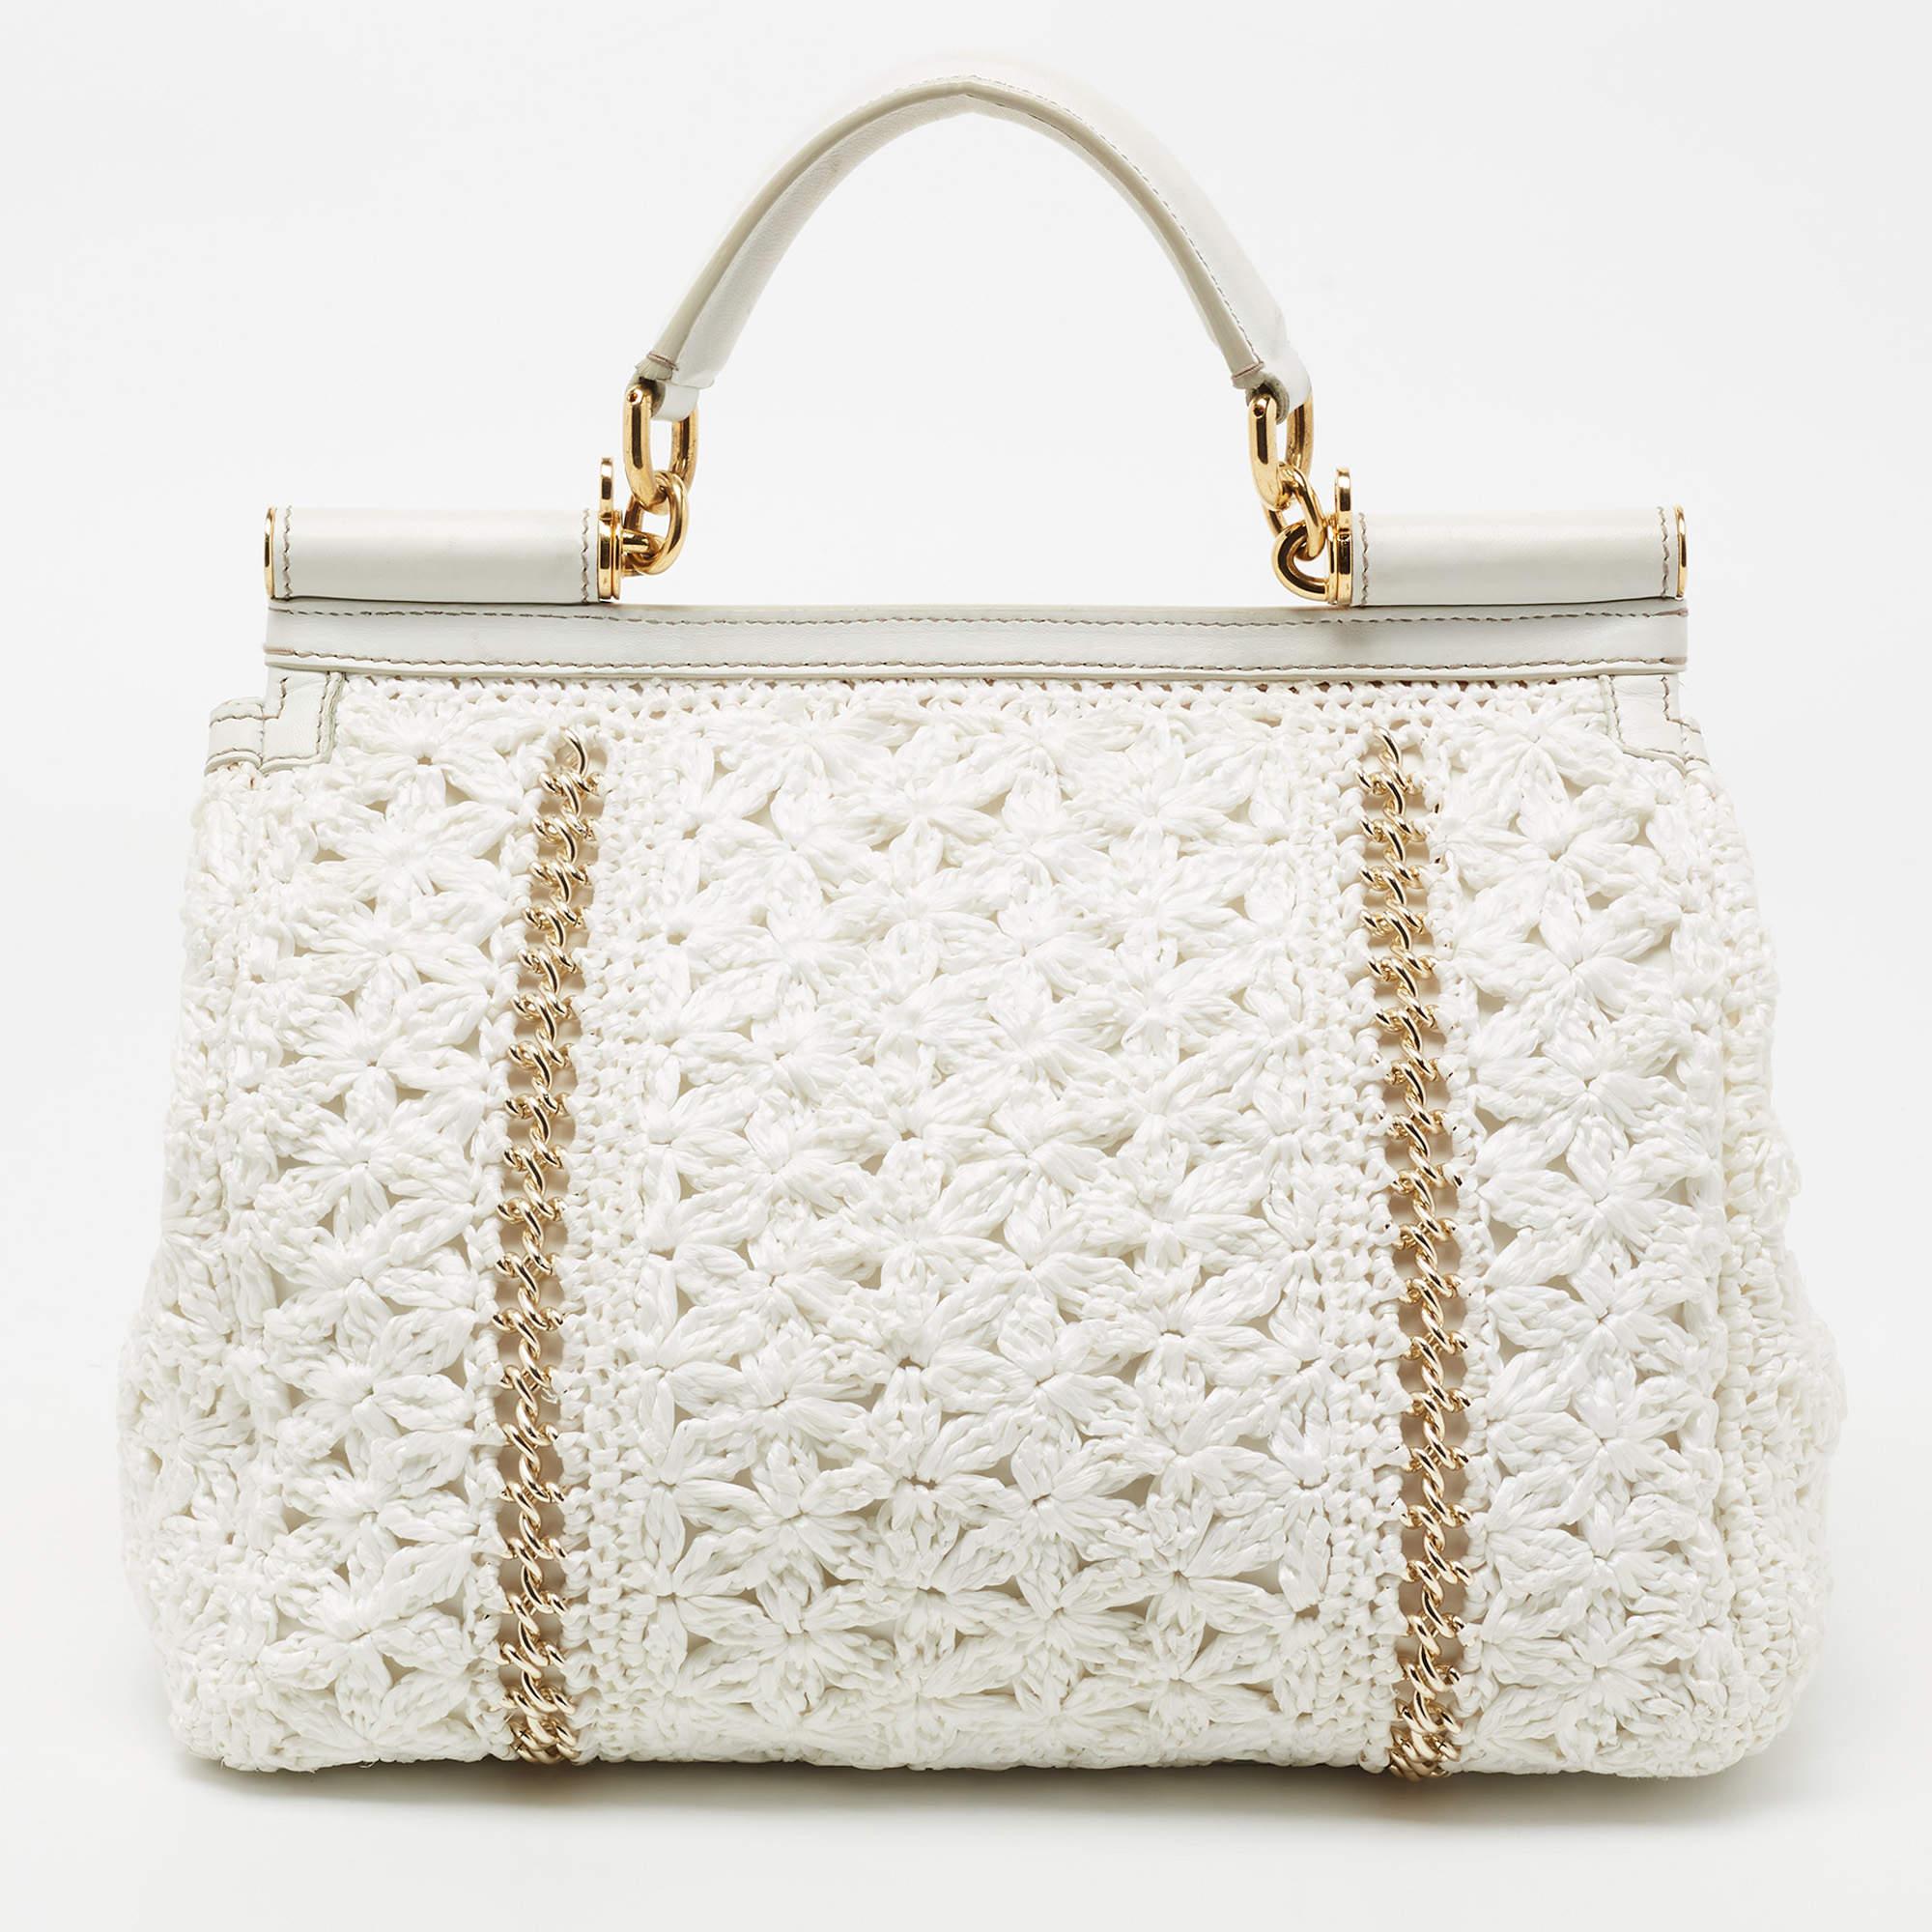 Meticulously crafted into an eye-catchy shape, this Miss Sicily tote from Dolce & Gabbana exudes just the right amount of charm and elegance! It is made from white straw crochet, with a logo plaque embellishing the front. It has a spacious interior,